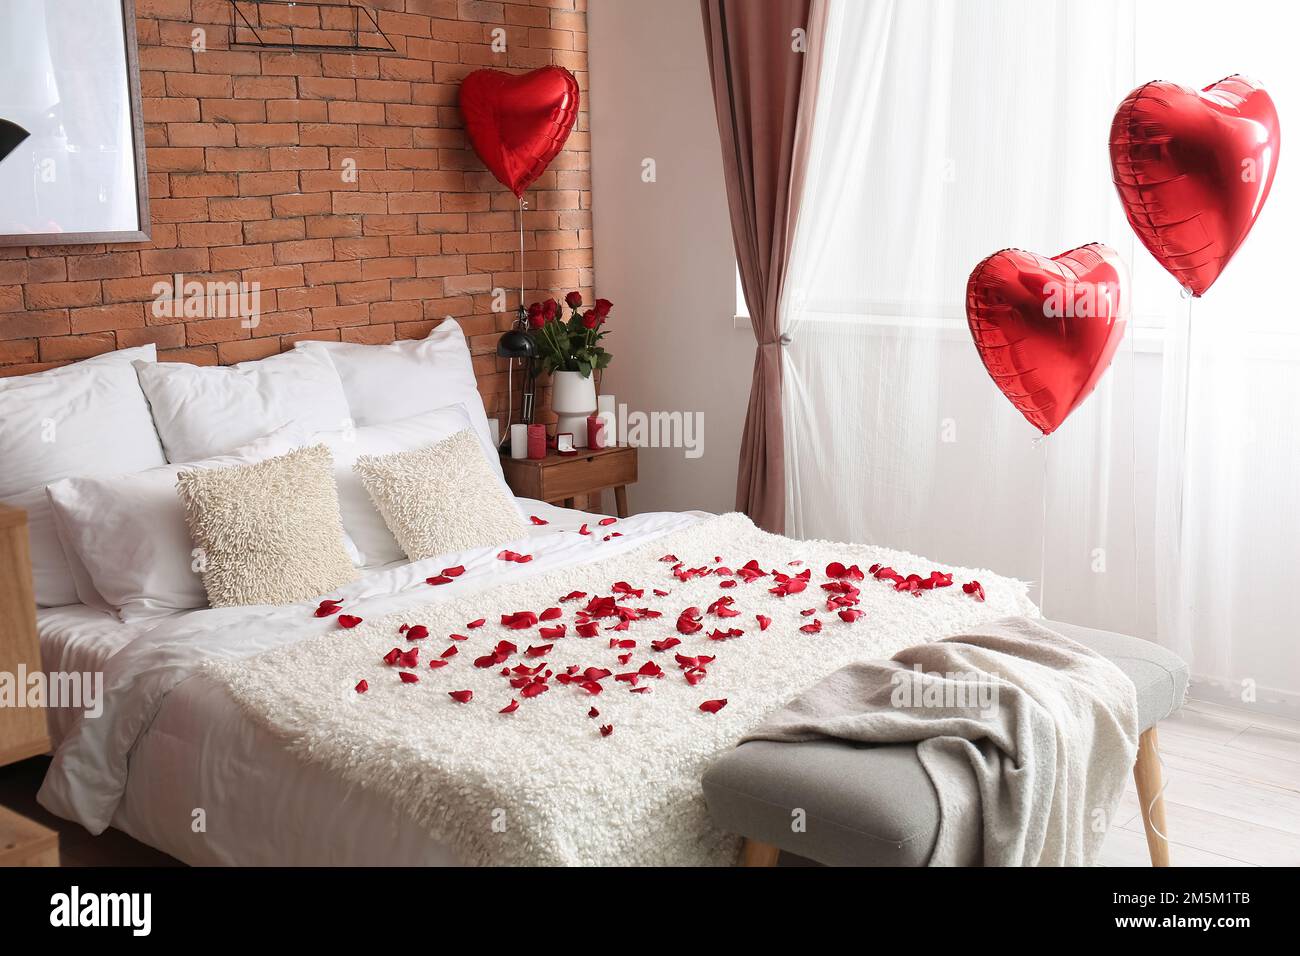 Interior of bedroom decorated for Valentine's Day with roses, candles and  balloons Stock Photo - Alamy